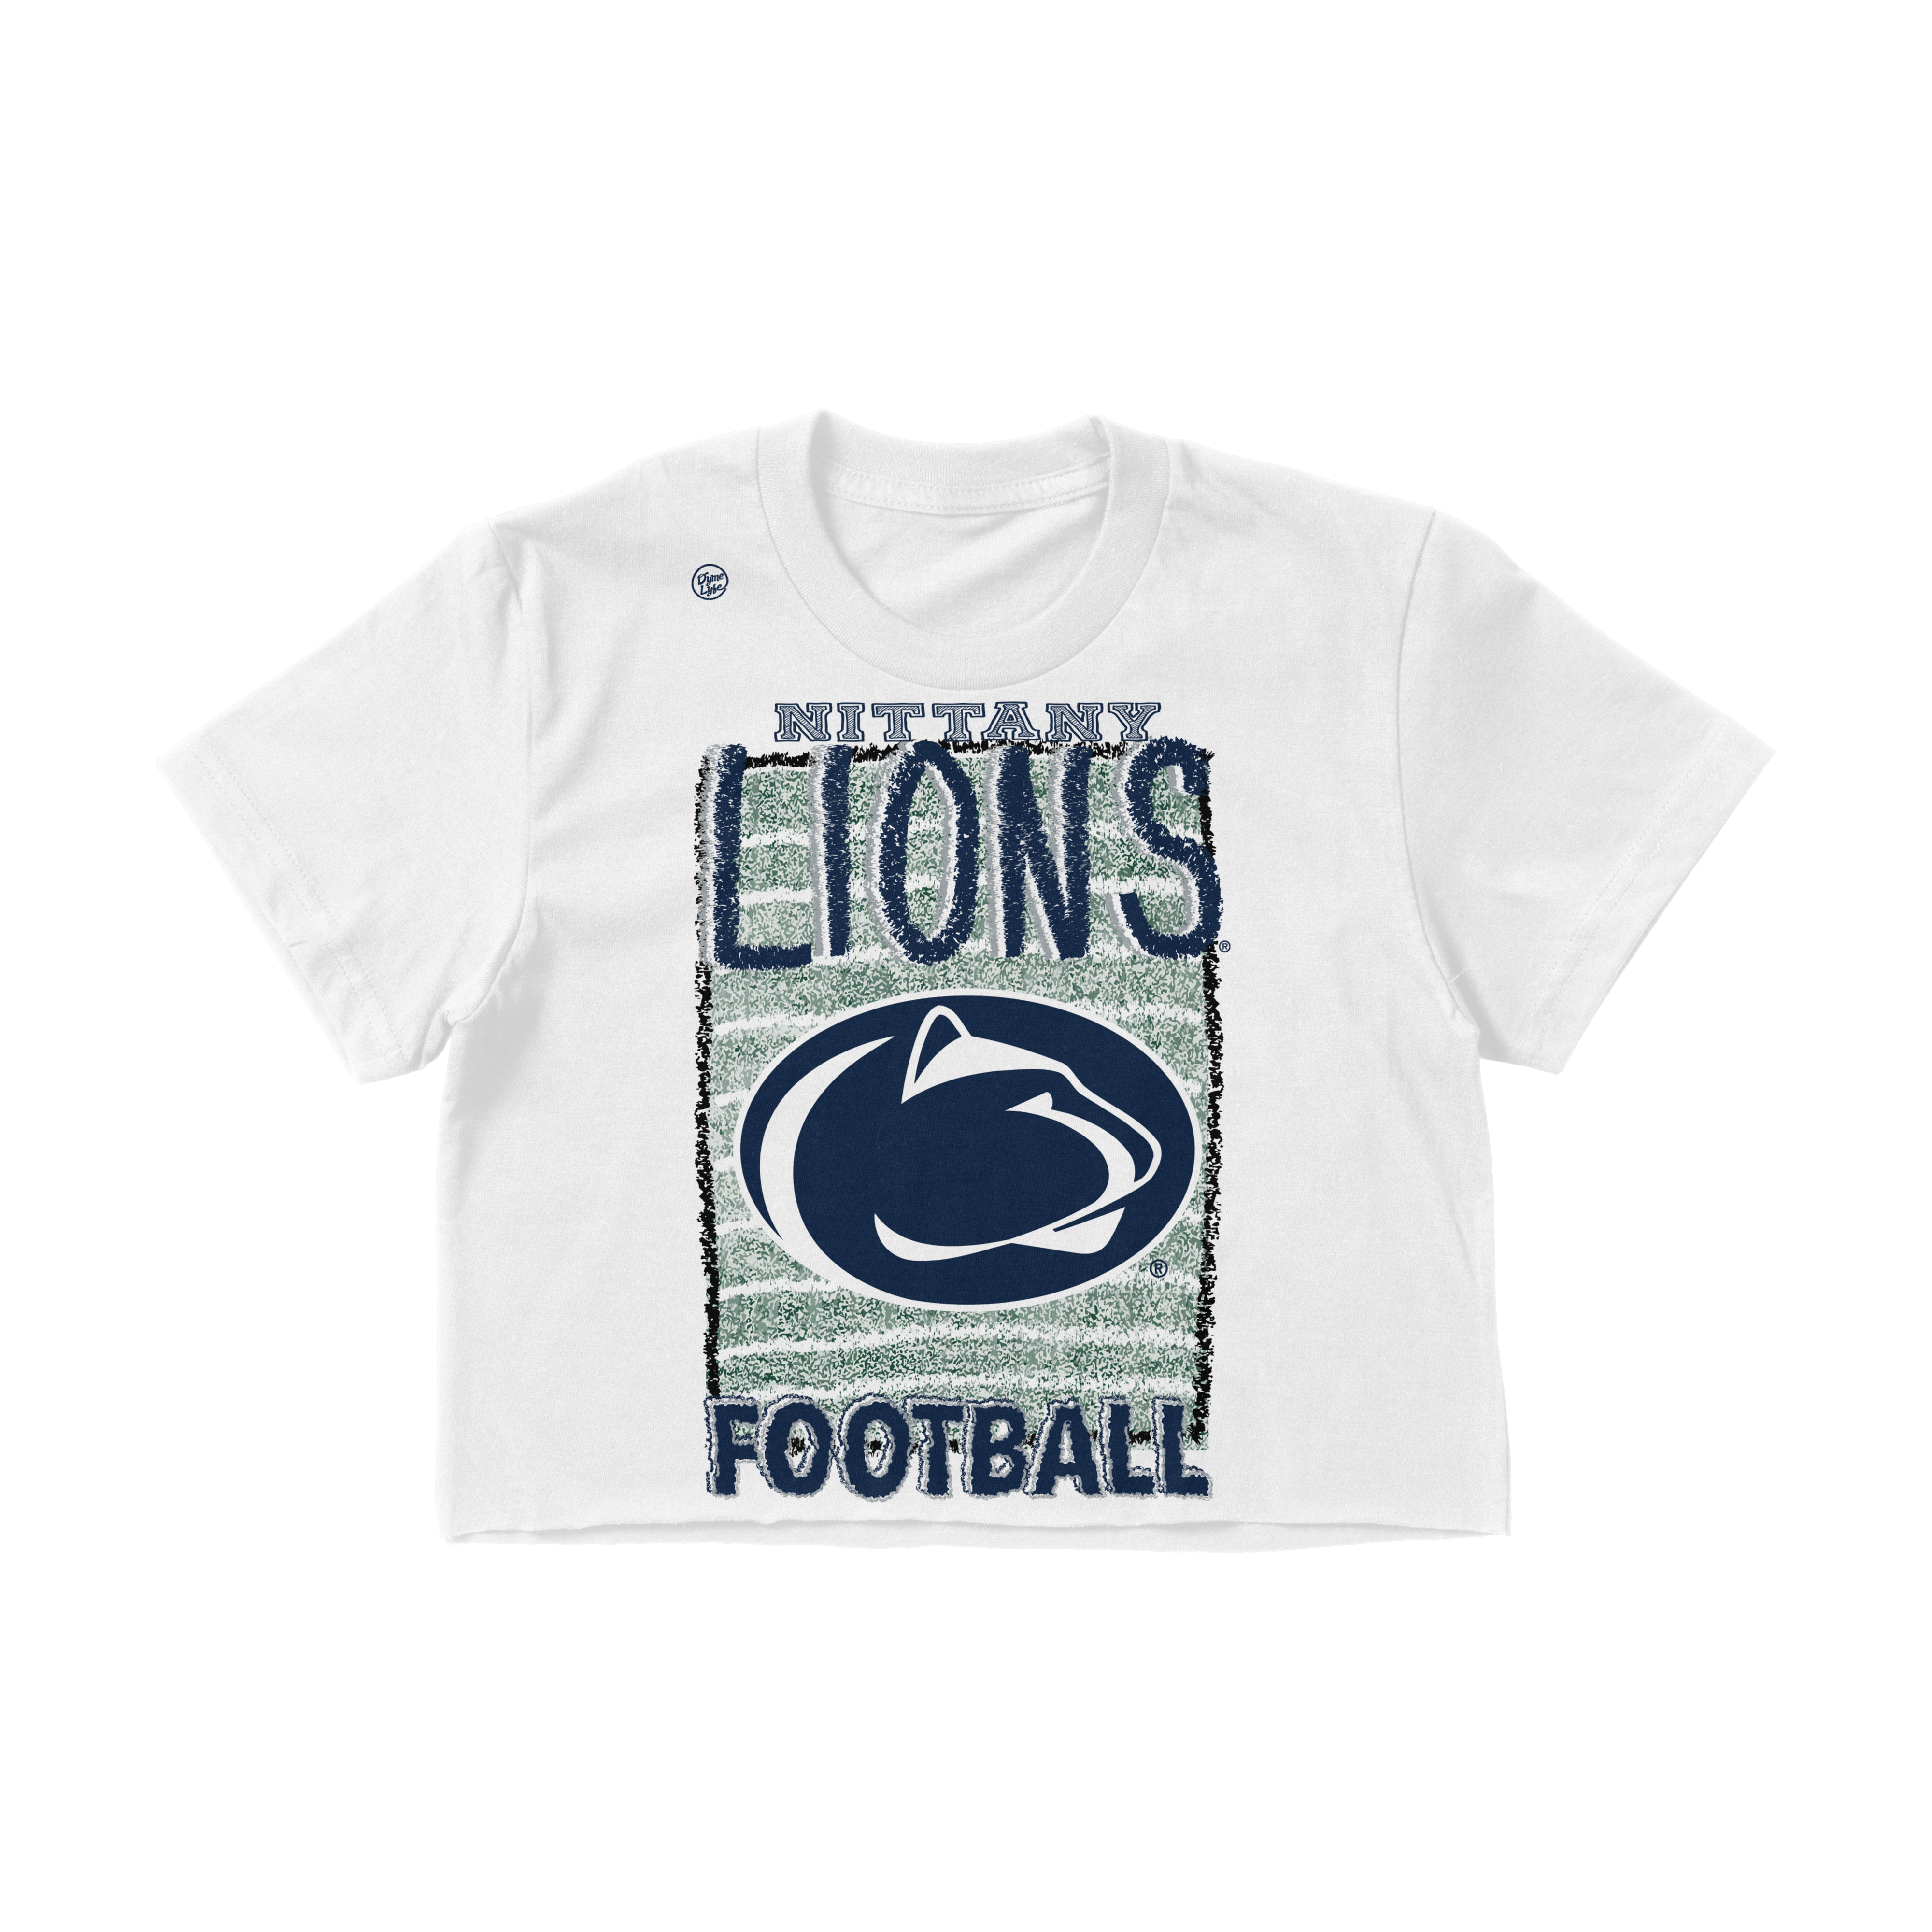 Penn State Nittany Lions Women’s Crayon Crop Top